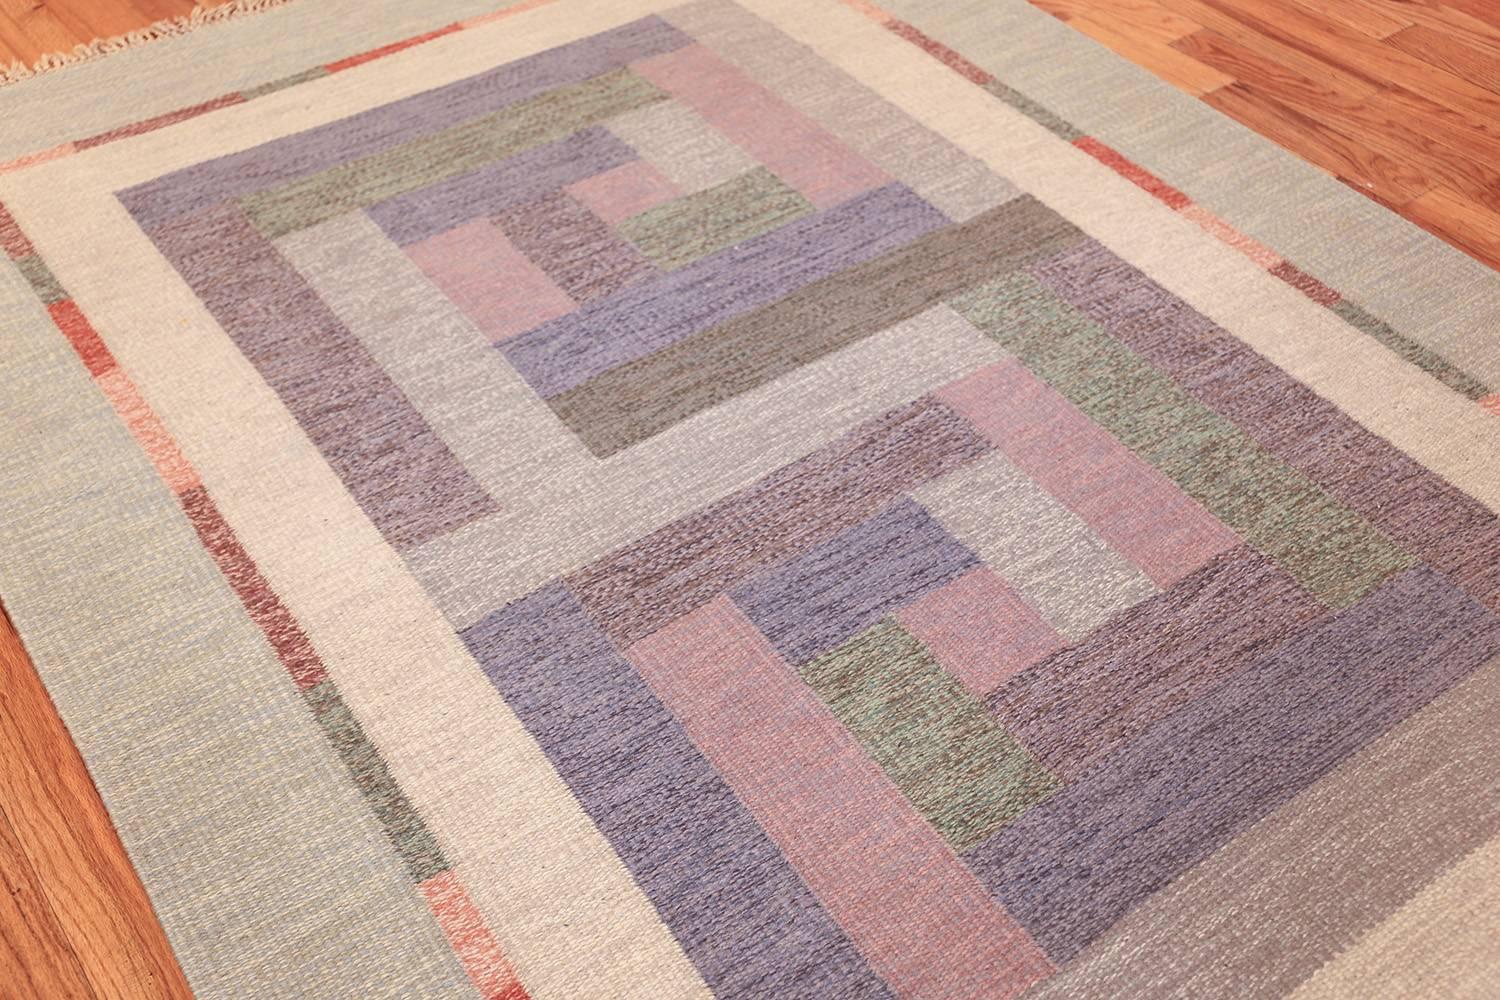 Magnificent Signed “NN” Vintage Geometric Swedish Scandinavian Kilim Rug, Country of Origin / Rug Type: Scandinavia, Circa Date: Mid 20th Century. Size: 5 ft 5 in x 8 ft (1.65 m x 2.44 m).